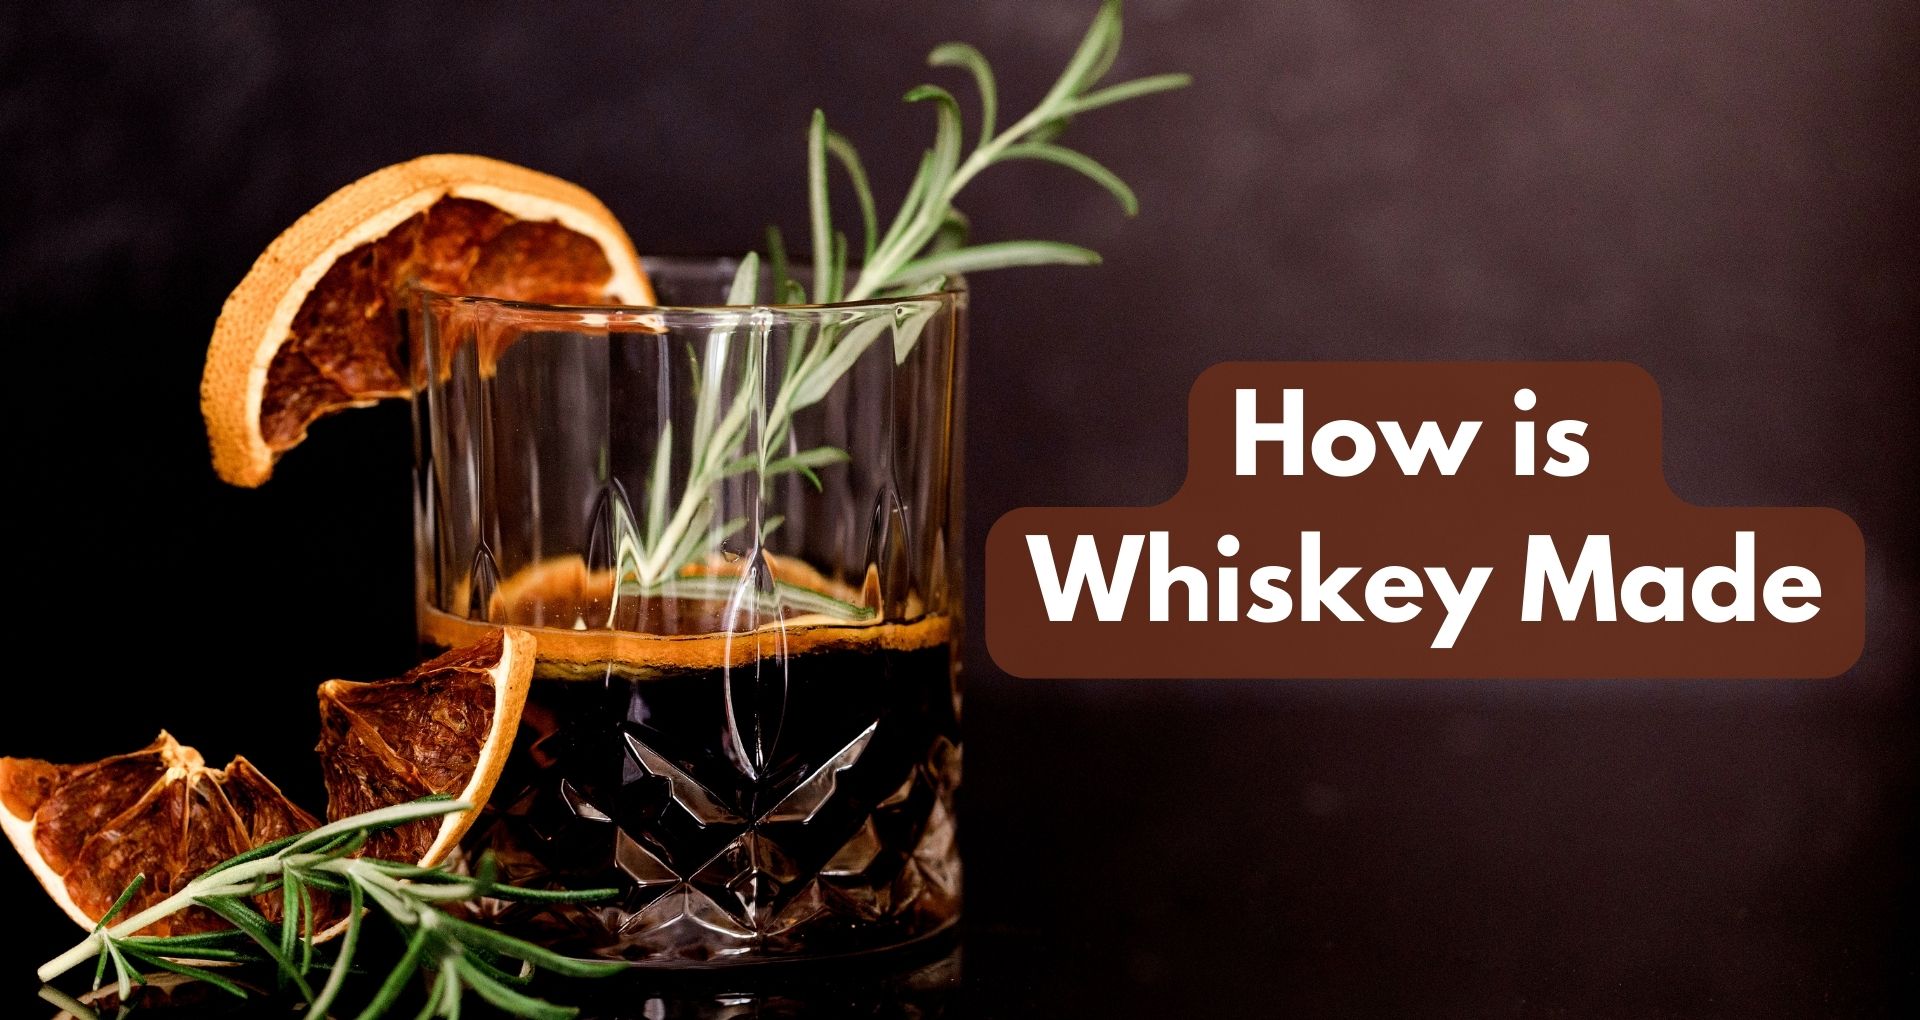 How is Whiskey Made?